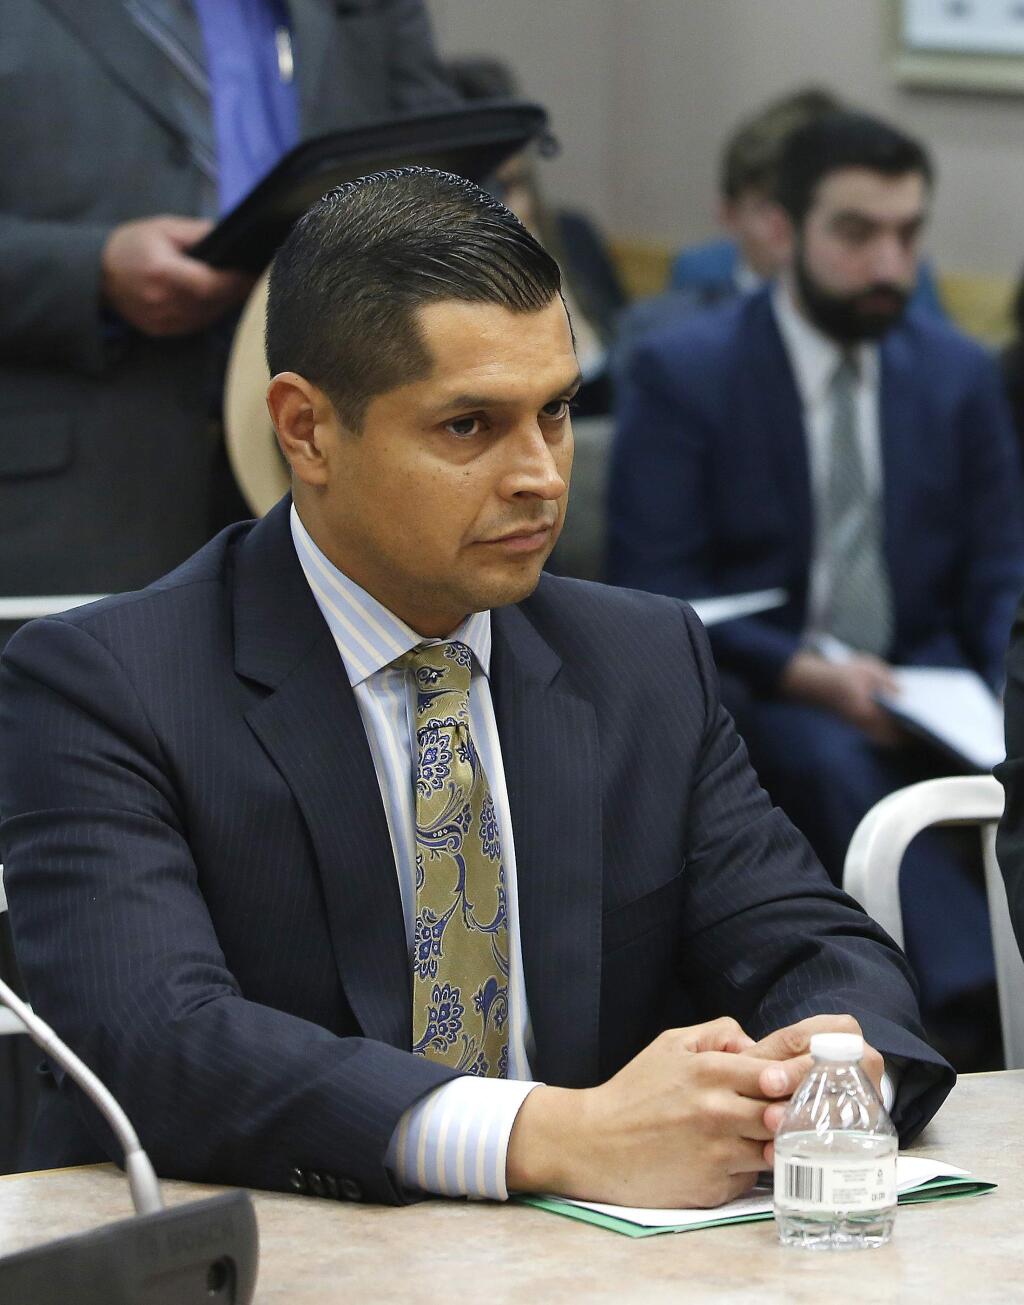 FILE -- In this June 14, 2016 file photo Assemblyman Miguel Santiago, D-Los Angeles, appears before the Senate Public Safety Committee, in Sacramento, Calif. Santiago says, Friday, June 22, 2018, that his family is being harassed online because he altered a bill aimed at restoring net neutrality. (AP Photo/Rich Pedroncelli, file)